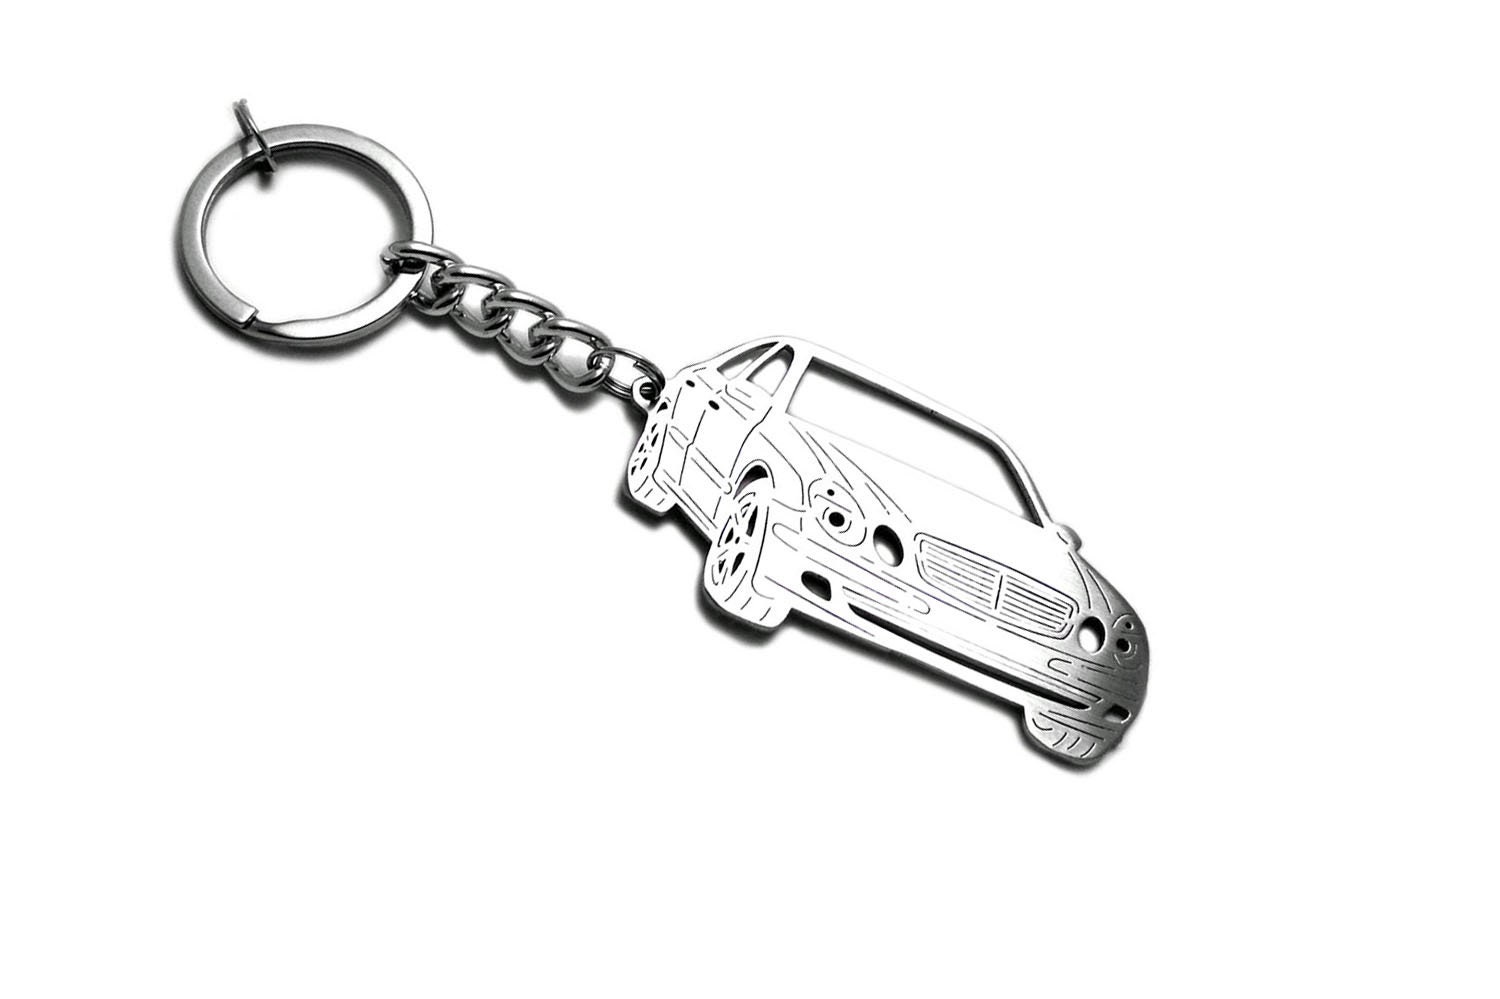 Keychain Fit Mercedes-benz W210 Stainless Steel Key Chain With Ring Keyring  Custom Key Ring Car Body Profile Design -  UK